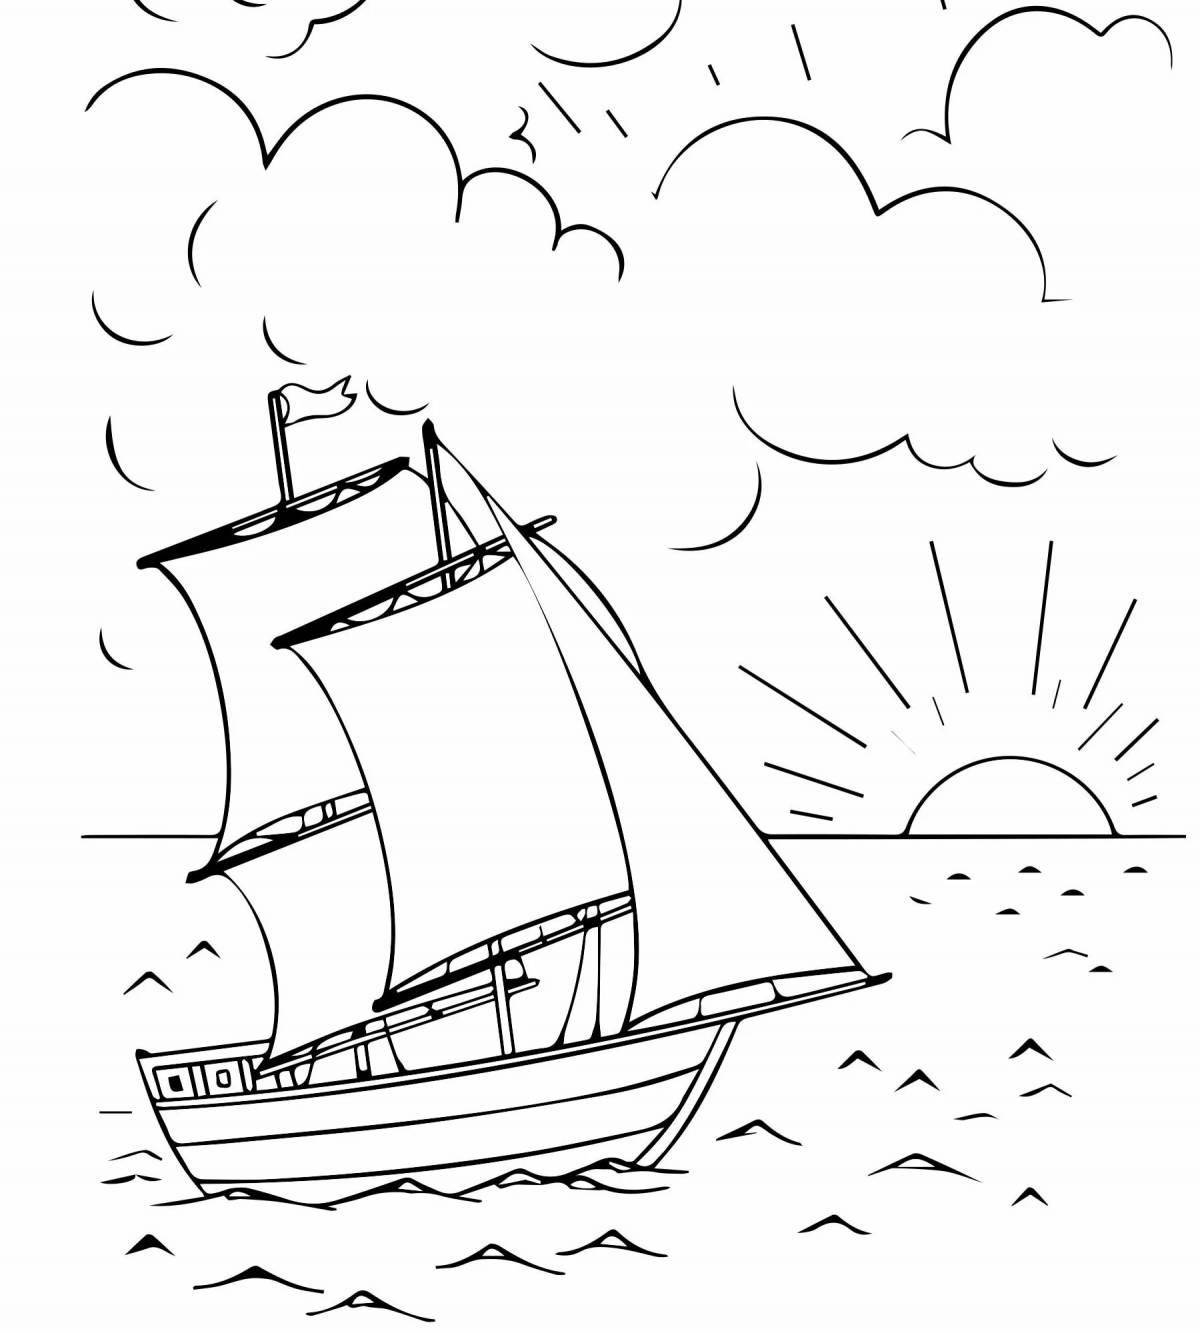 Exquisite Sailboat Coloring Page for Students